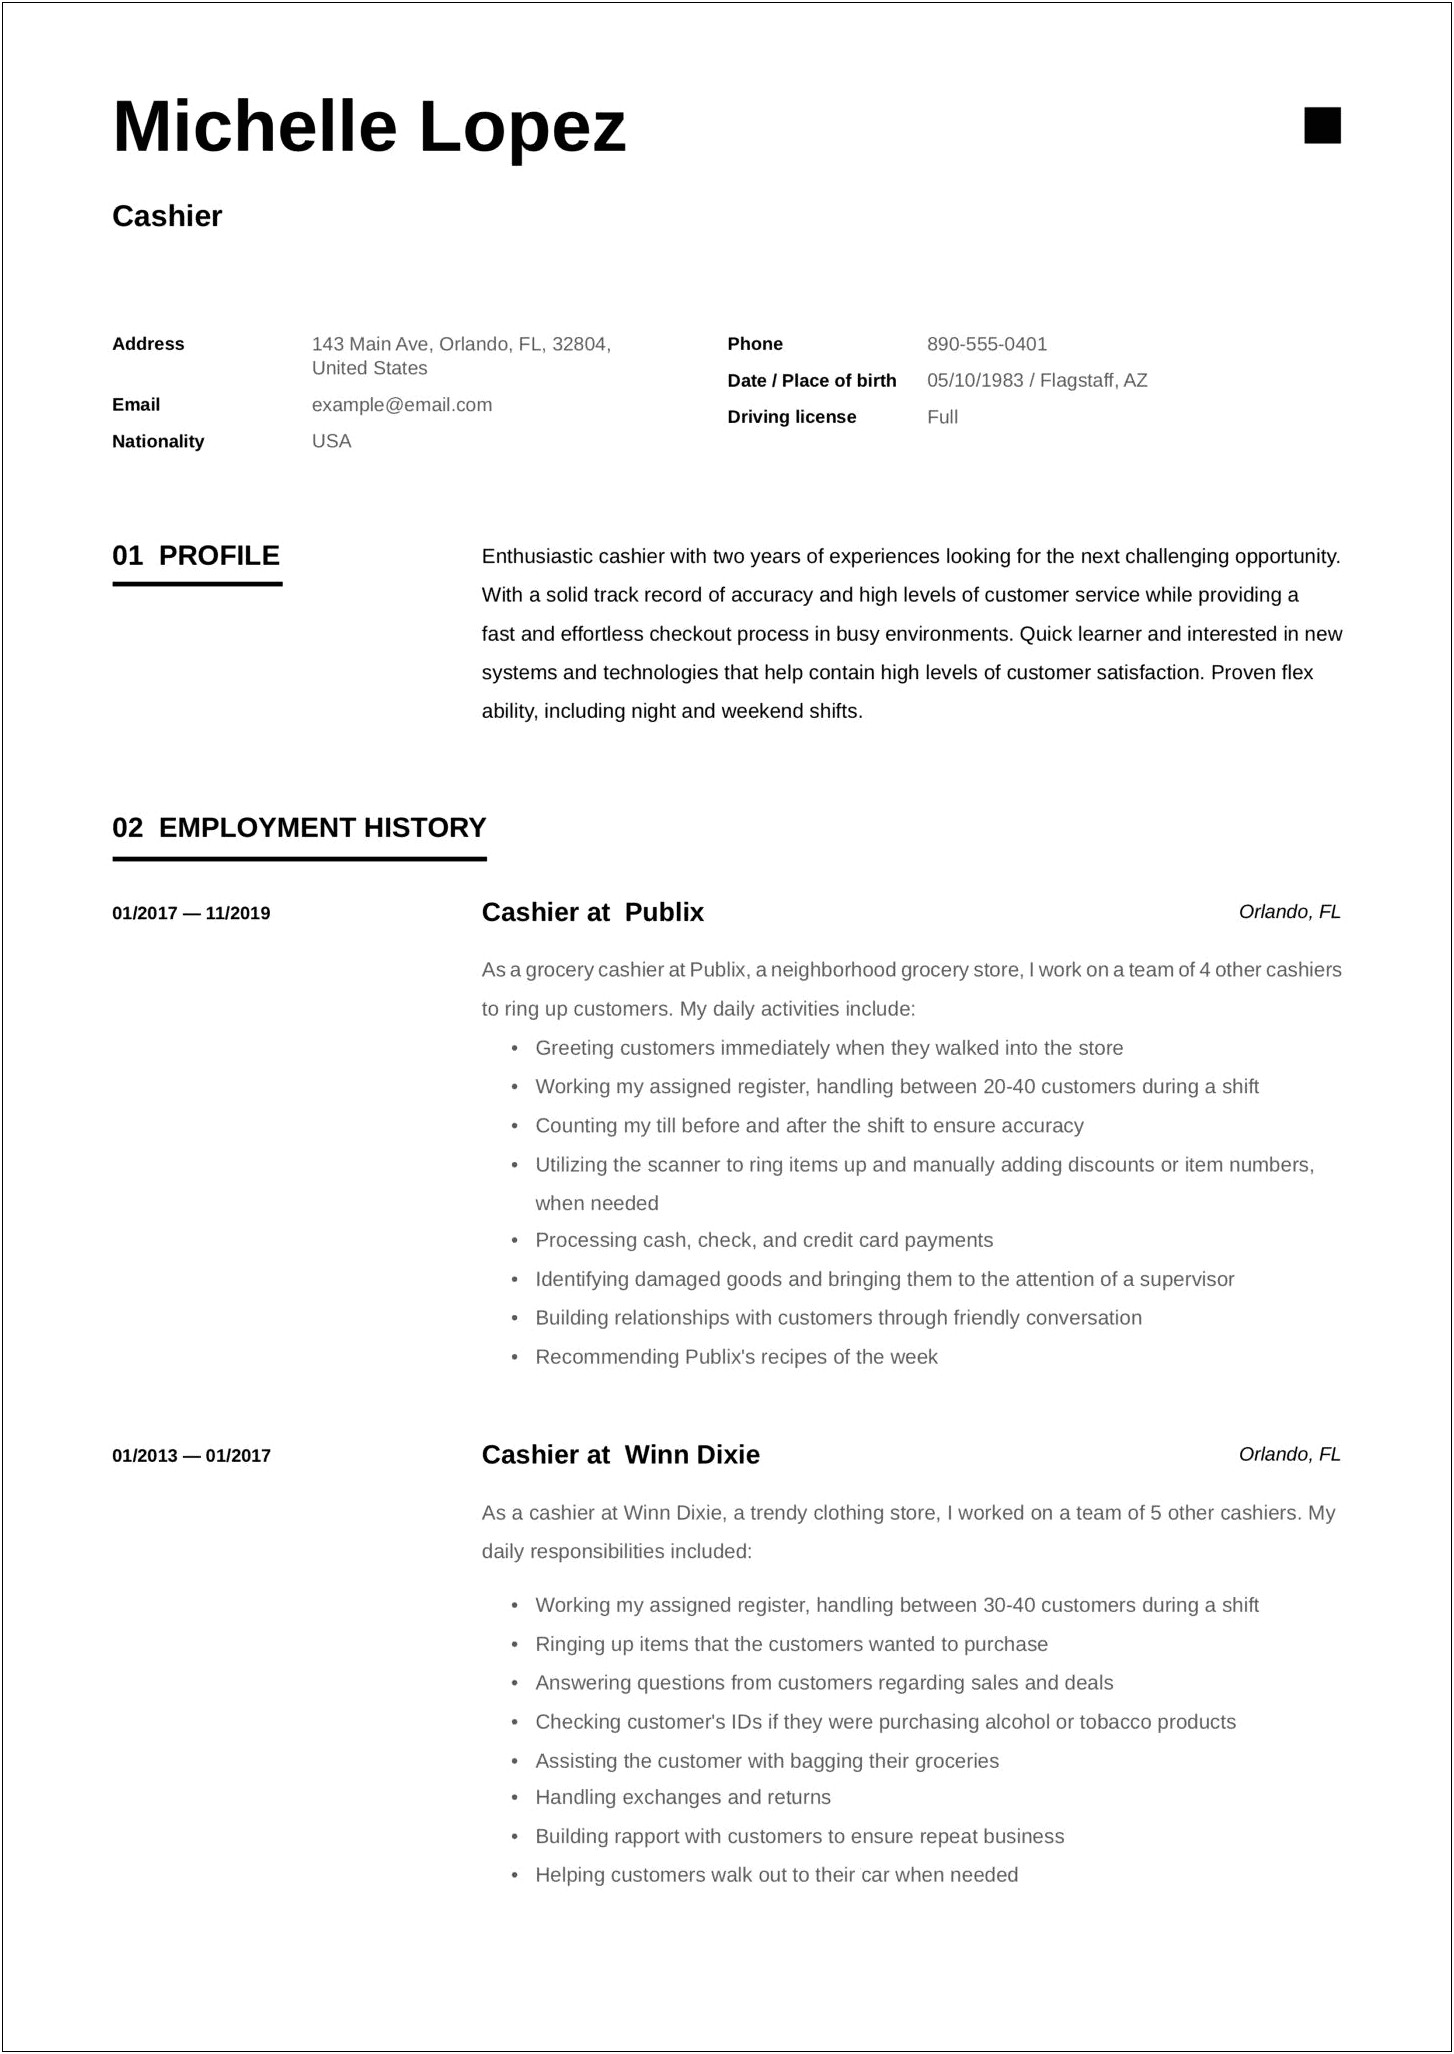 Resume With No Work Experience Cashier Position